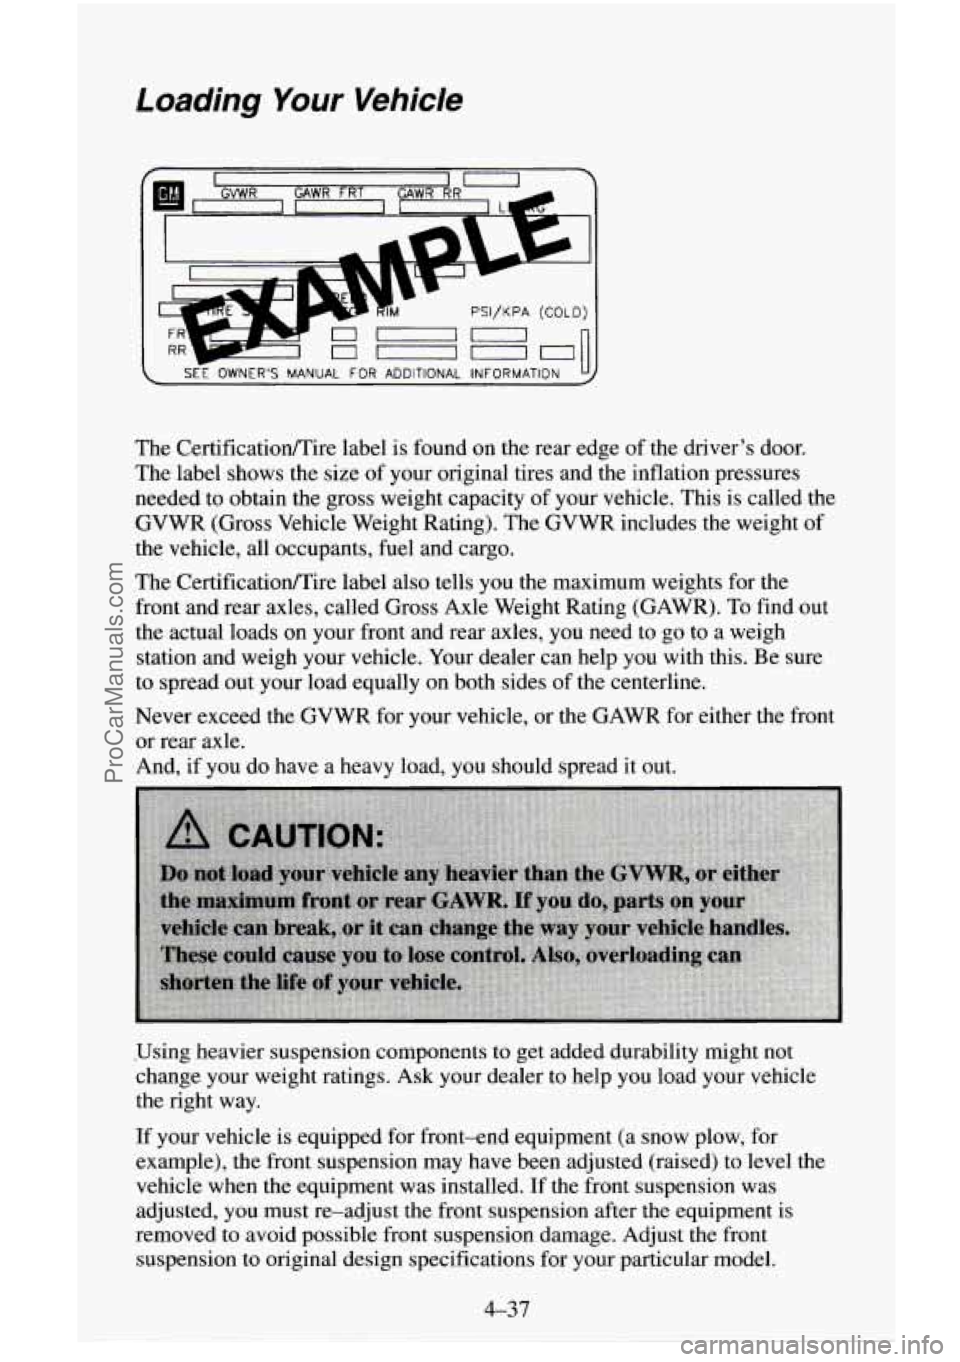 CHEVROLET SUBURBAN 1996  Owners Manual Loading Your Vehicle 
I 
PSI/KPA (COLD) 
~ SEE OWNERS MANUAL FOR ADDITIONAL  INFORMATION 
The  CertificatiodTire label is found  on the rear edge  of the drivers  door. 
The  label shows the size 
o